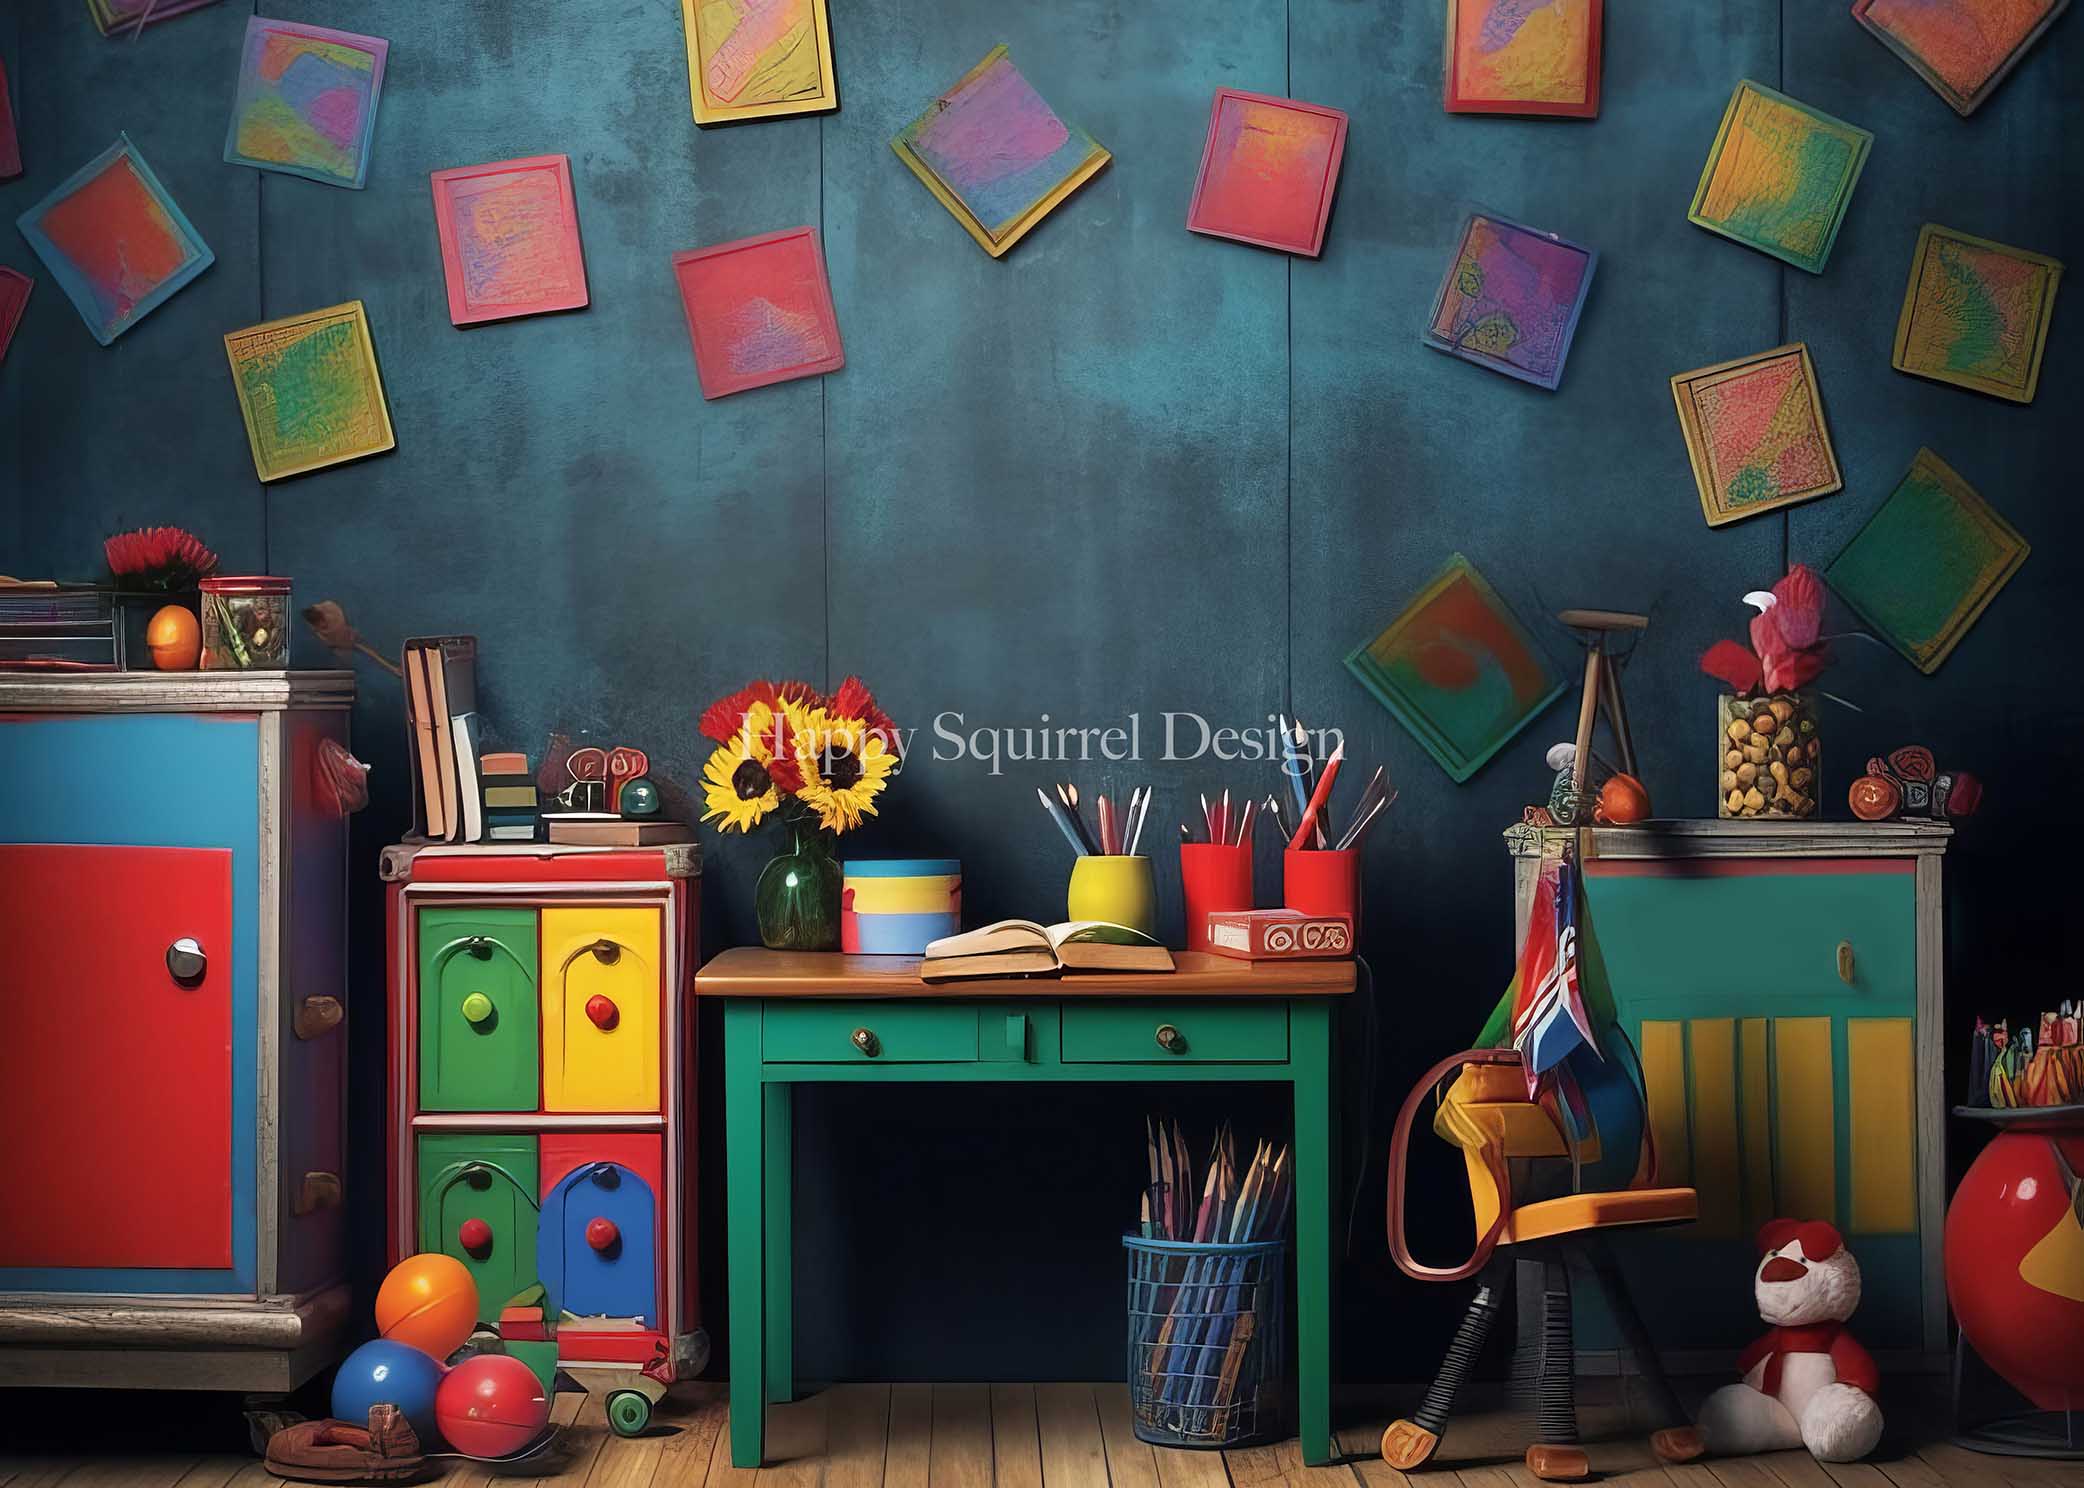 Kate Back to School Classroom Backdrop Designed by Happy Squirrel Design